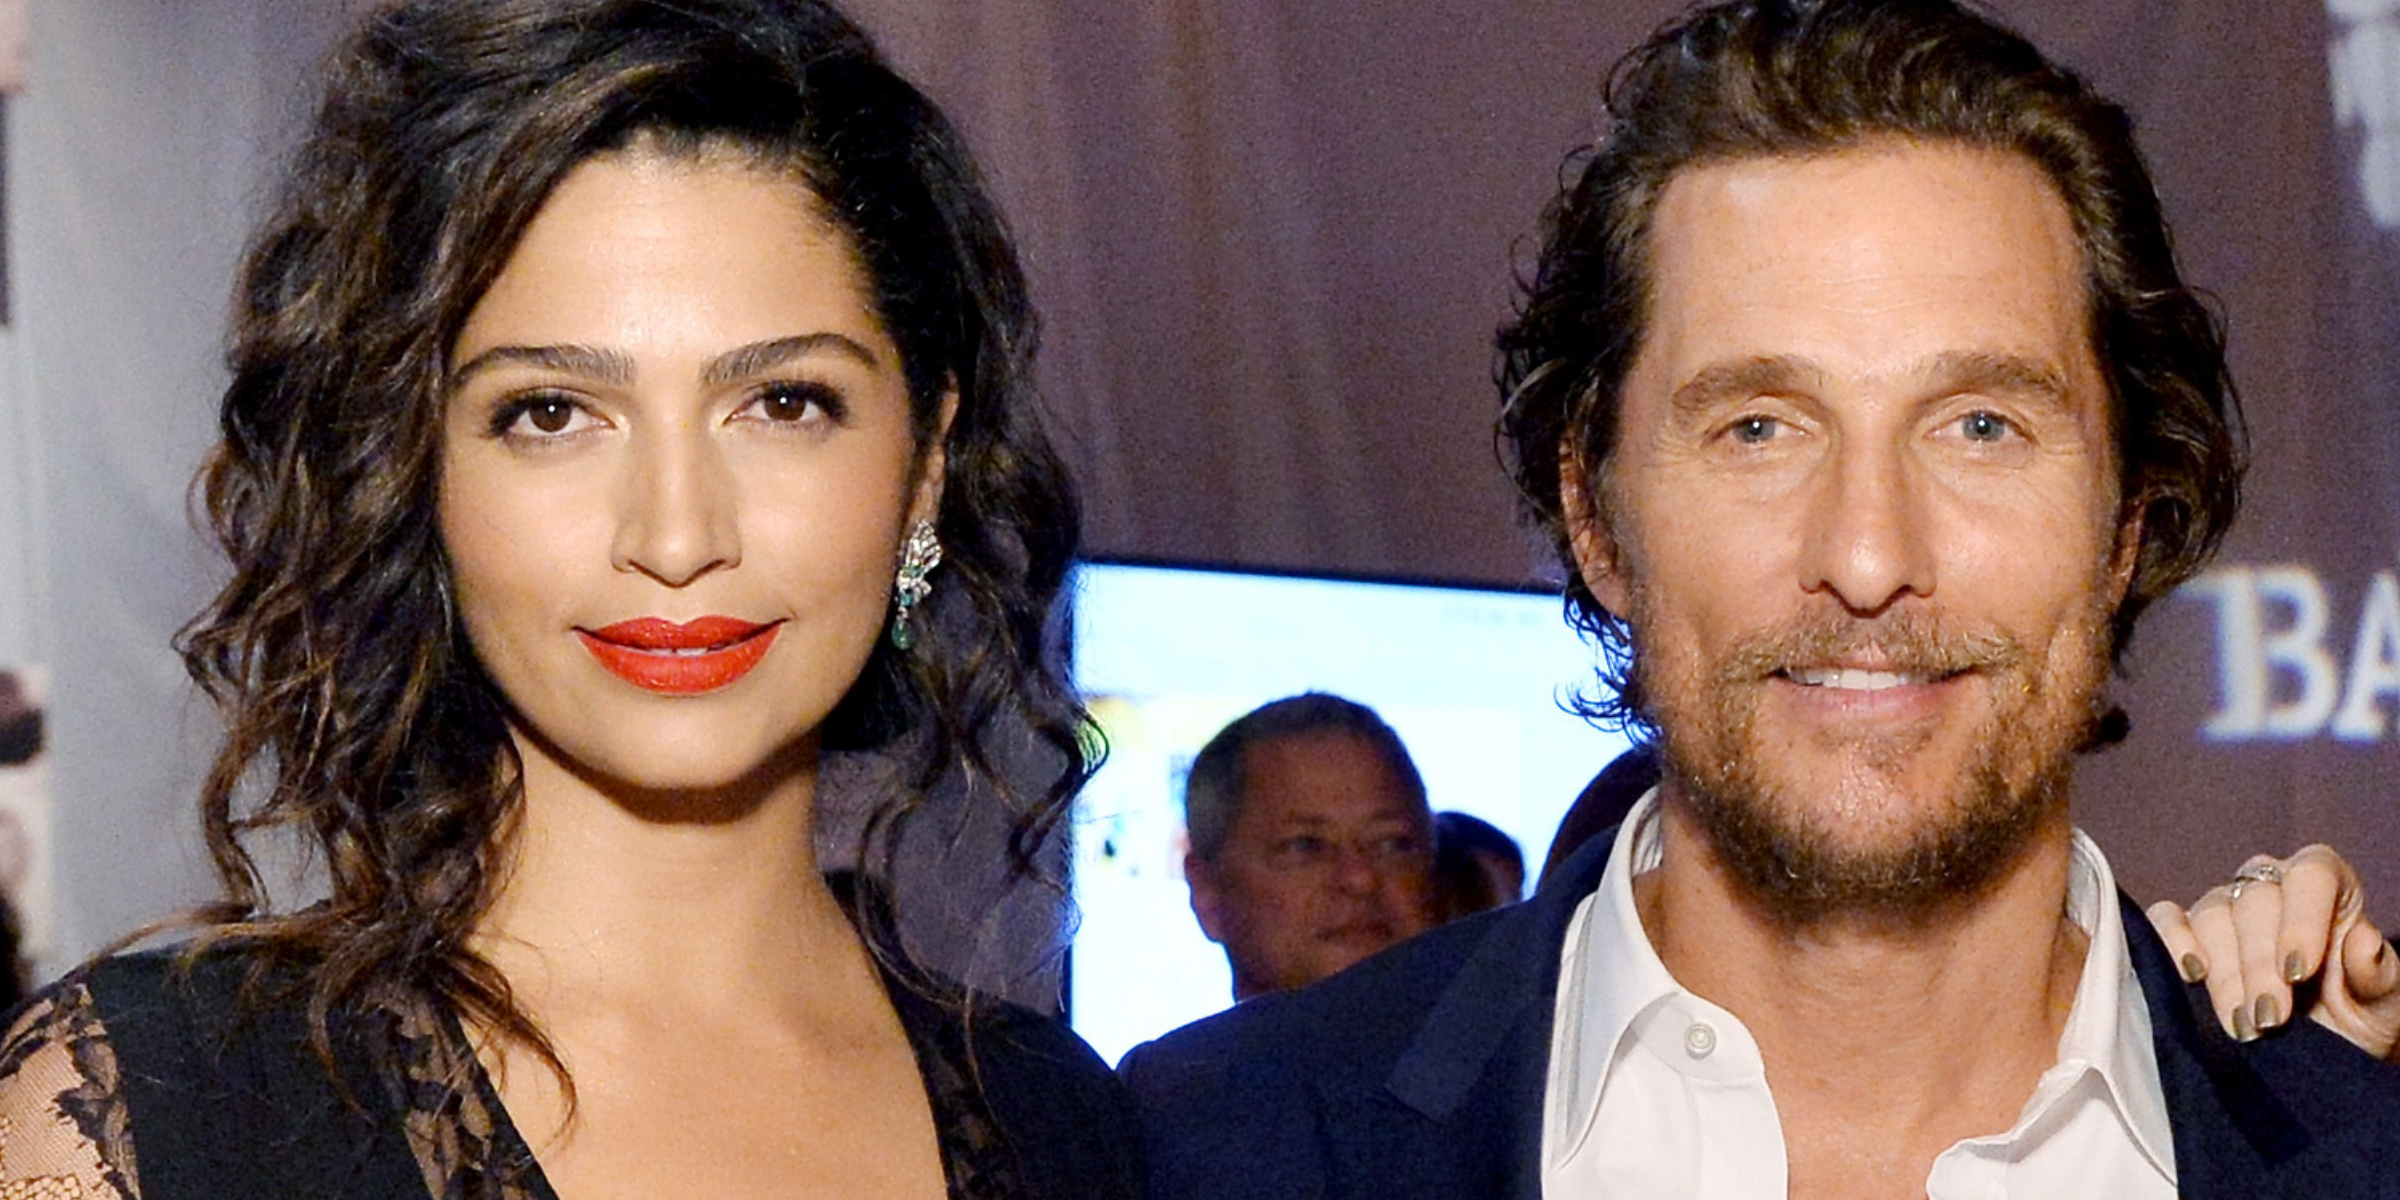 Camila Alves and Matthew McConaughey | Source: Getty Images